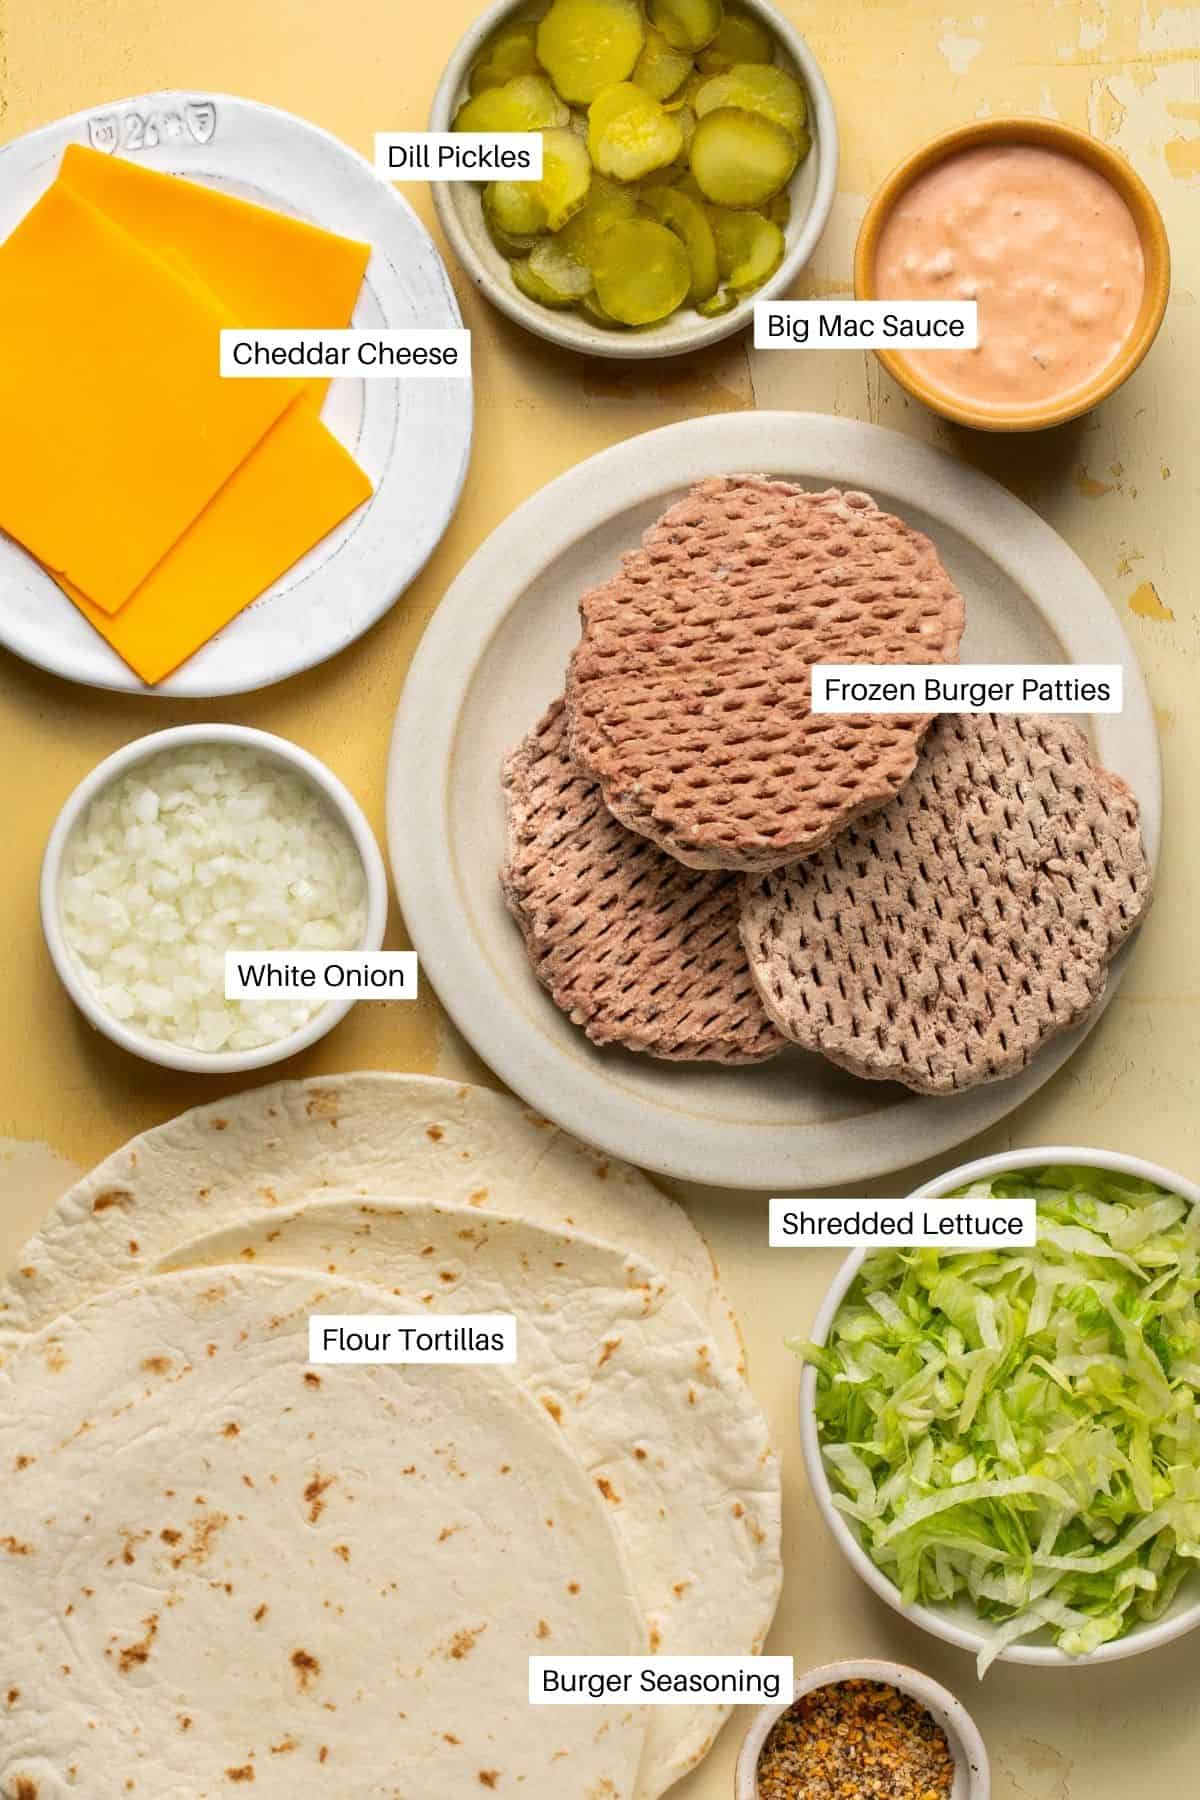 Frozen burger patties, tortillas, cheddar cheese slices, burger seasoning, Big Mac sauce, shredded lettuce, white onion and dill pickles for Big Mac wraps. 